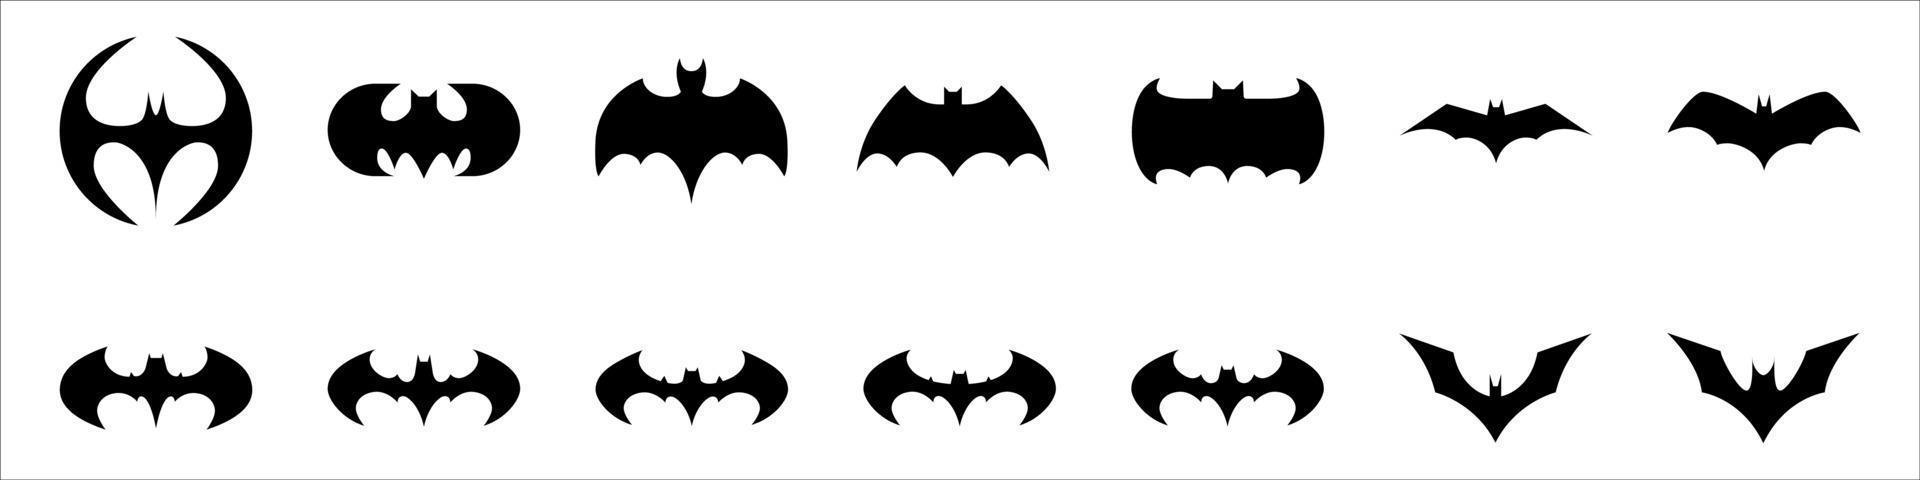 Black silhouettes of different bats vector